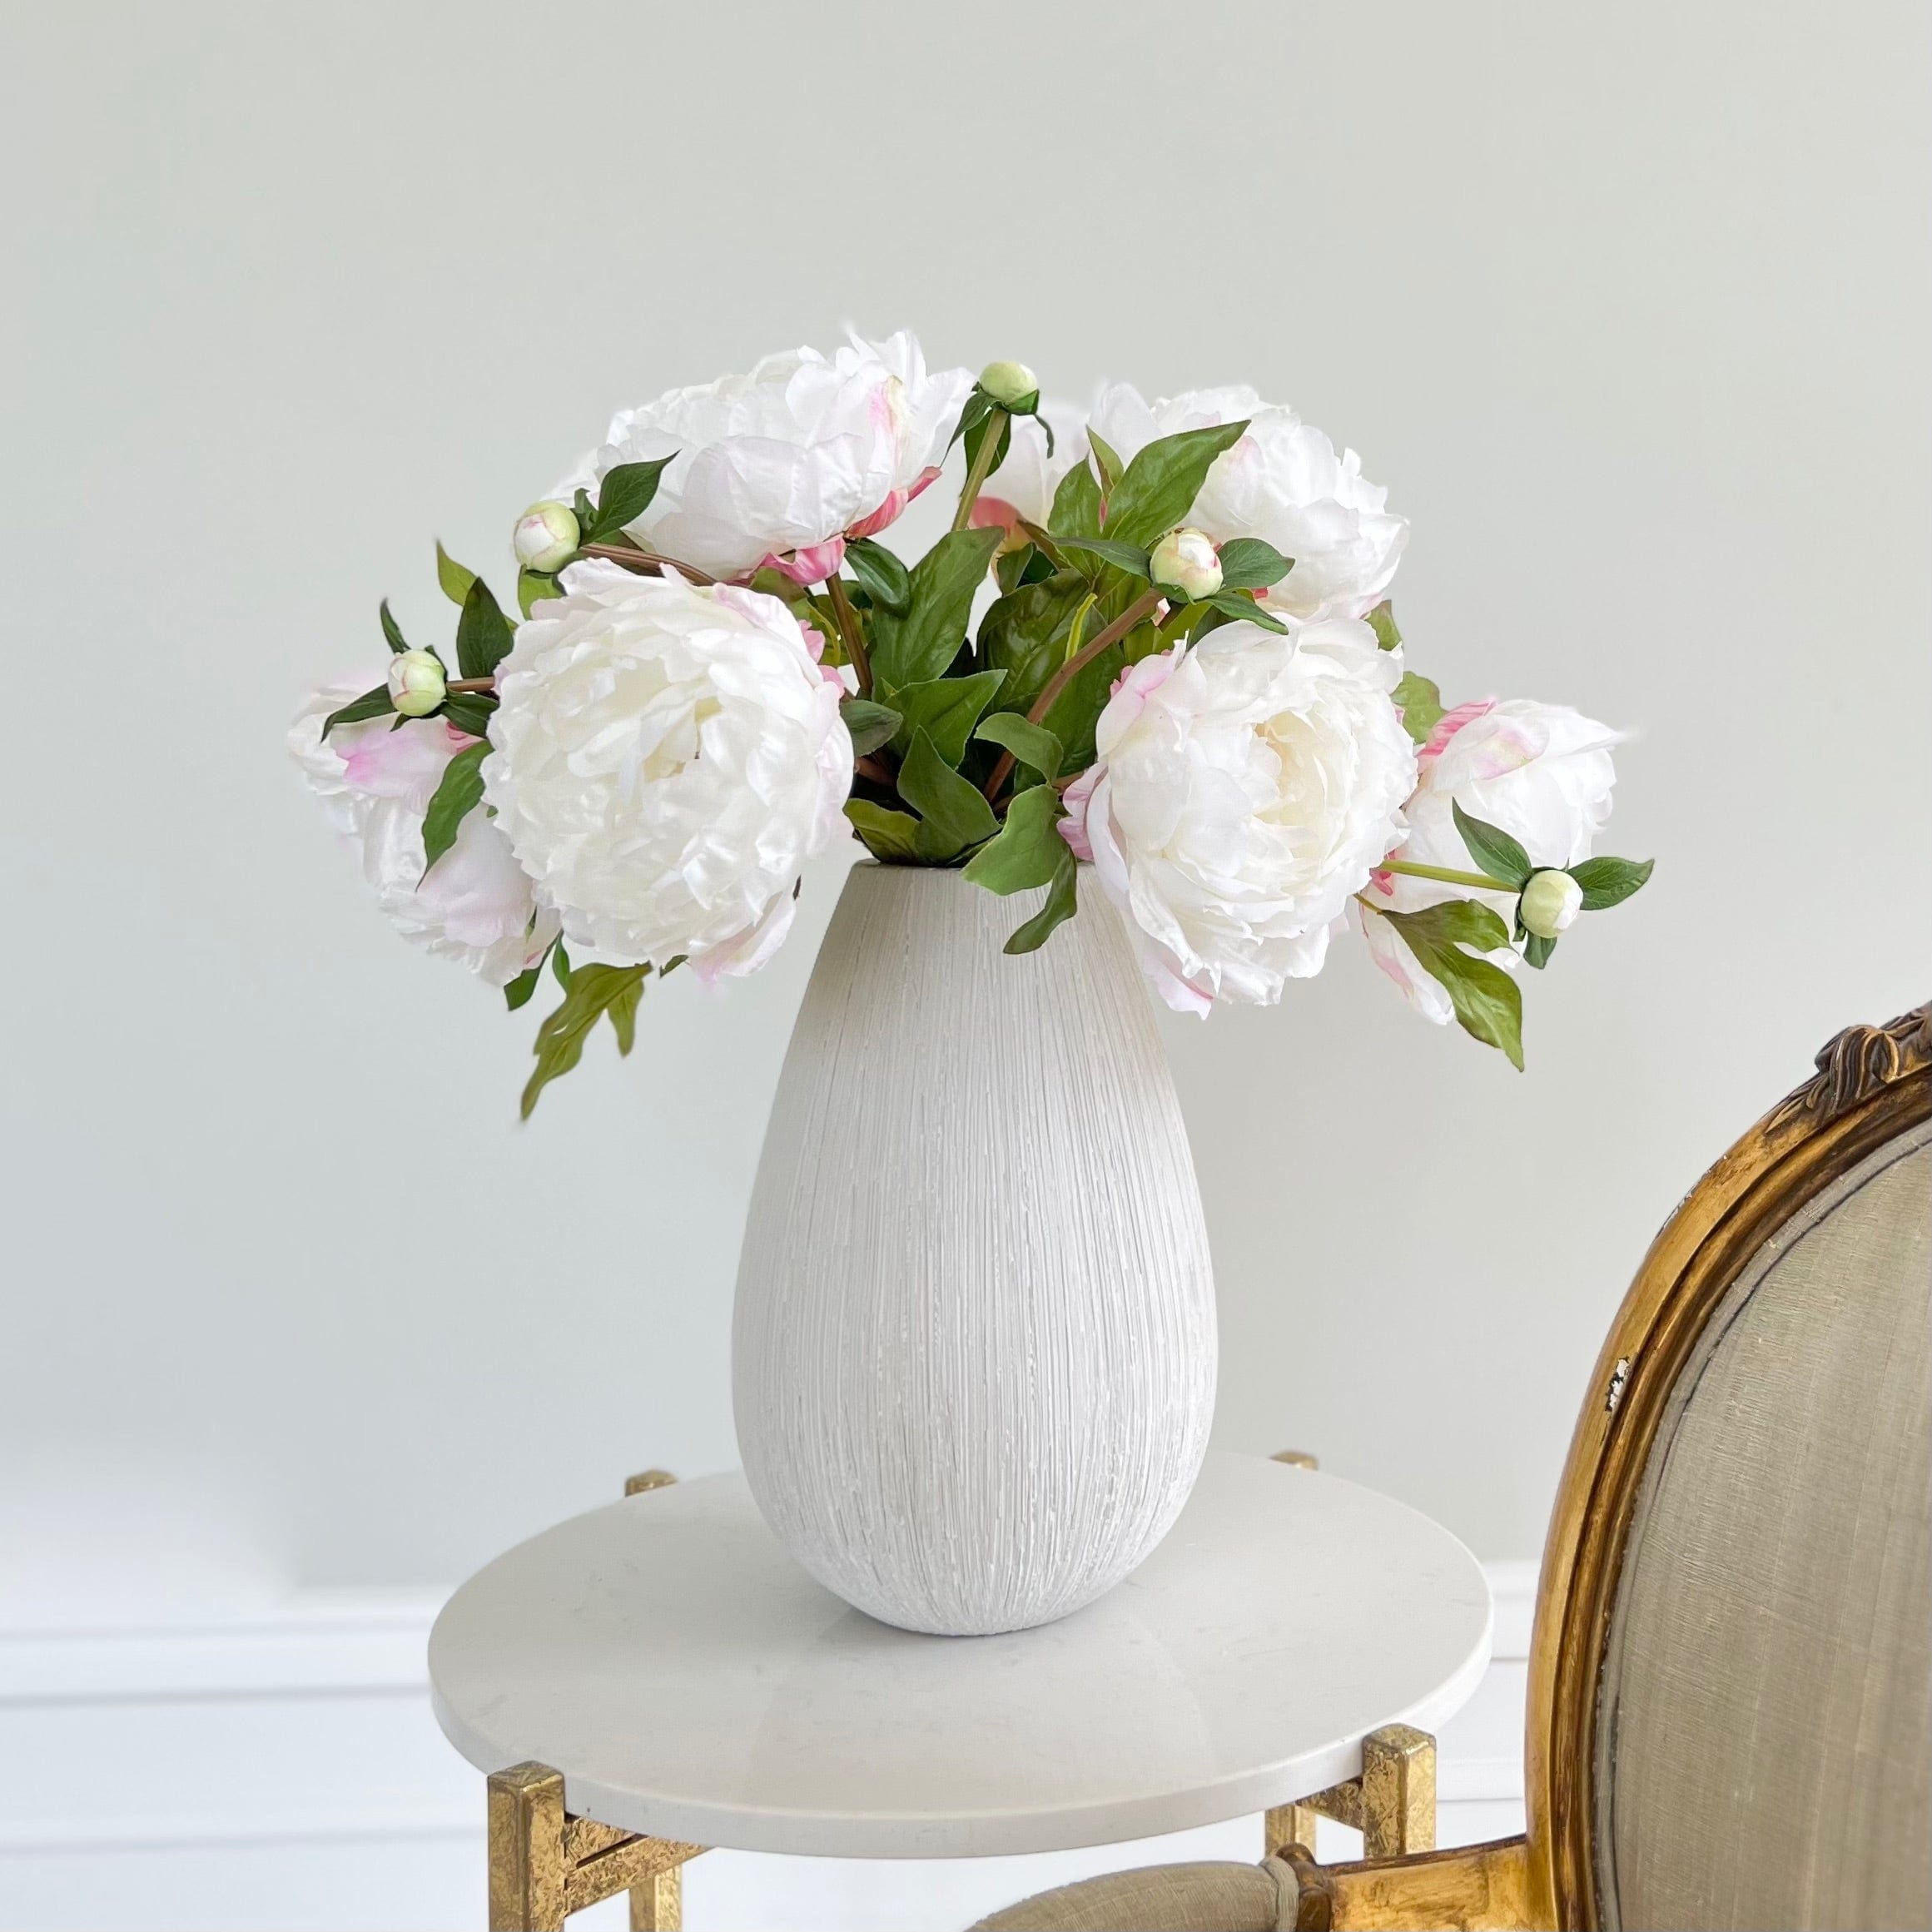 Artificial flowers luxury faux silk white classic peony bibury vase lifelike realistic faux flowers ABP1513 ABY6043WH